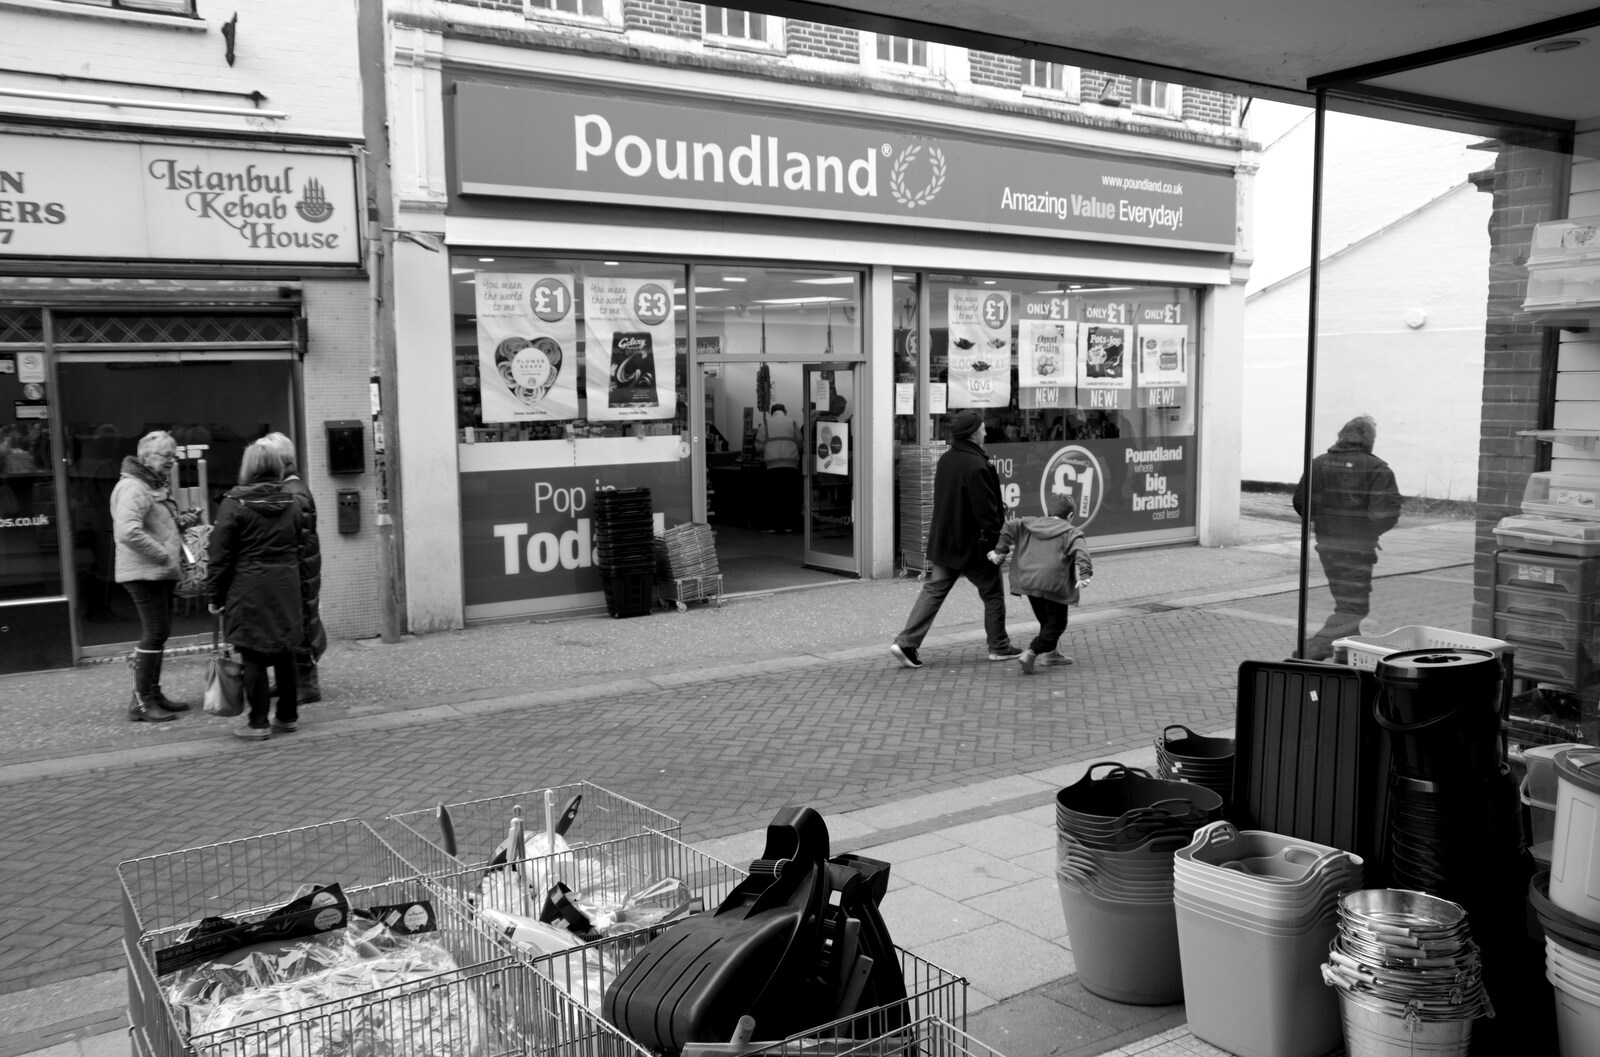 A view of Poundland, which was once Woolworth's from A Trip to High Lodge, Brandon, Suffolk - 7th March 2020